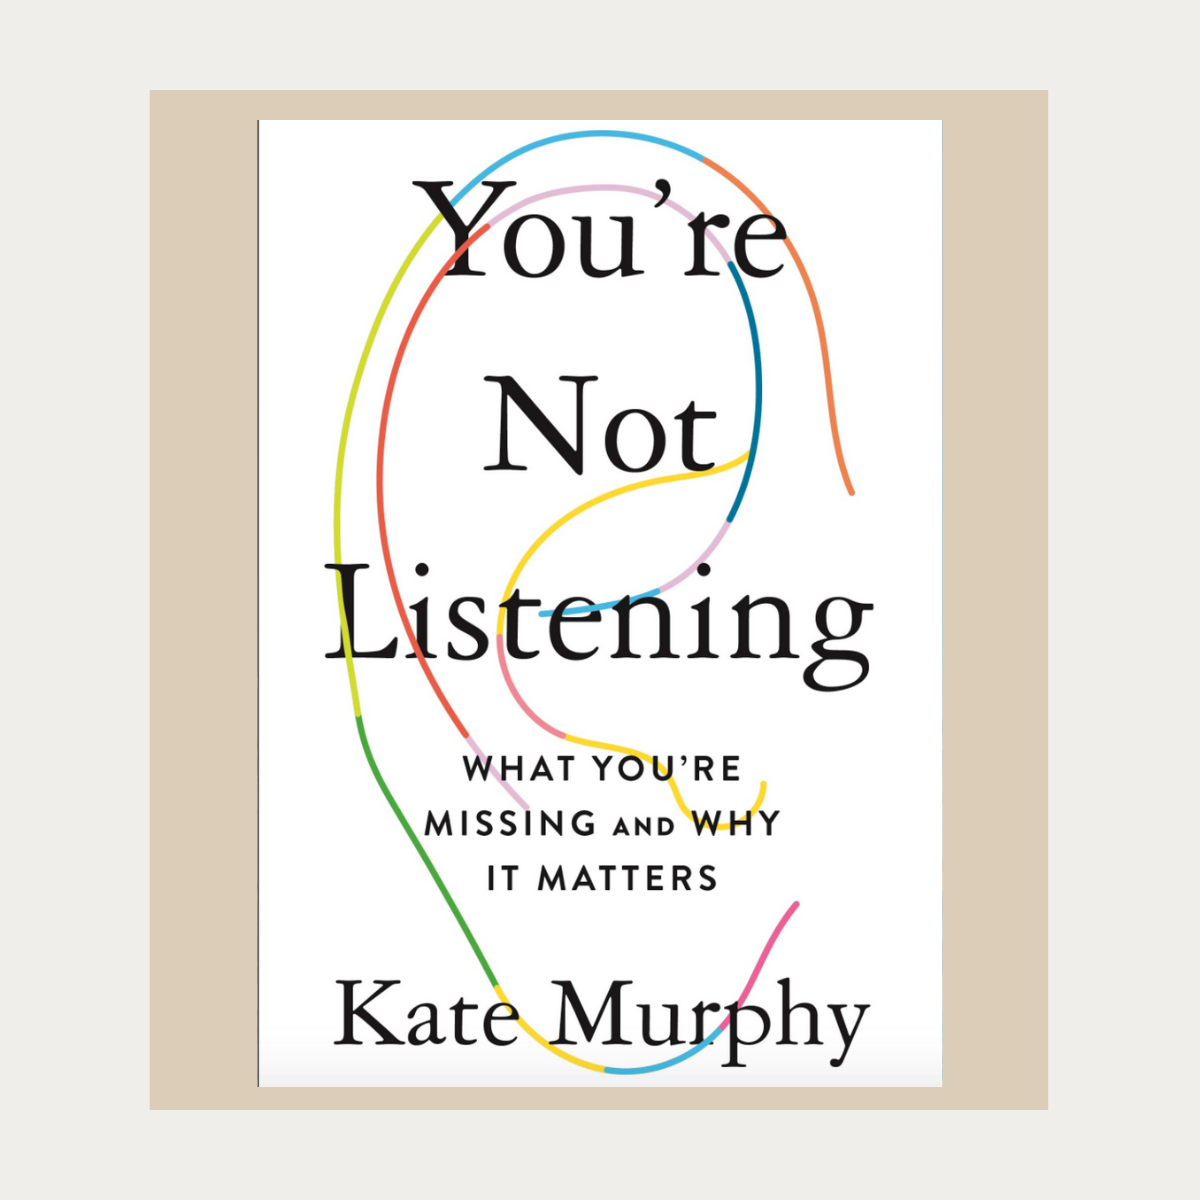 You’re Not Listening: What You’re Missing and Why It Matters, by Kate Murphy